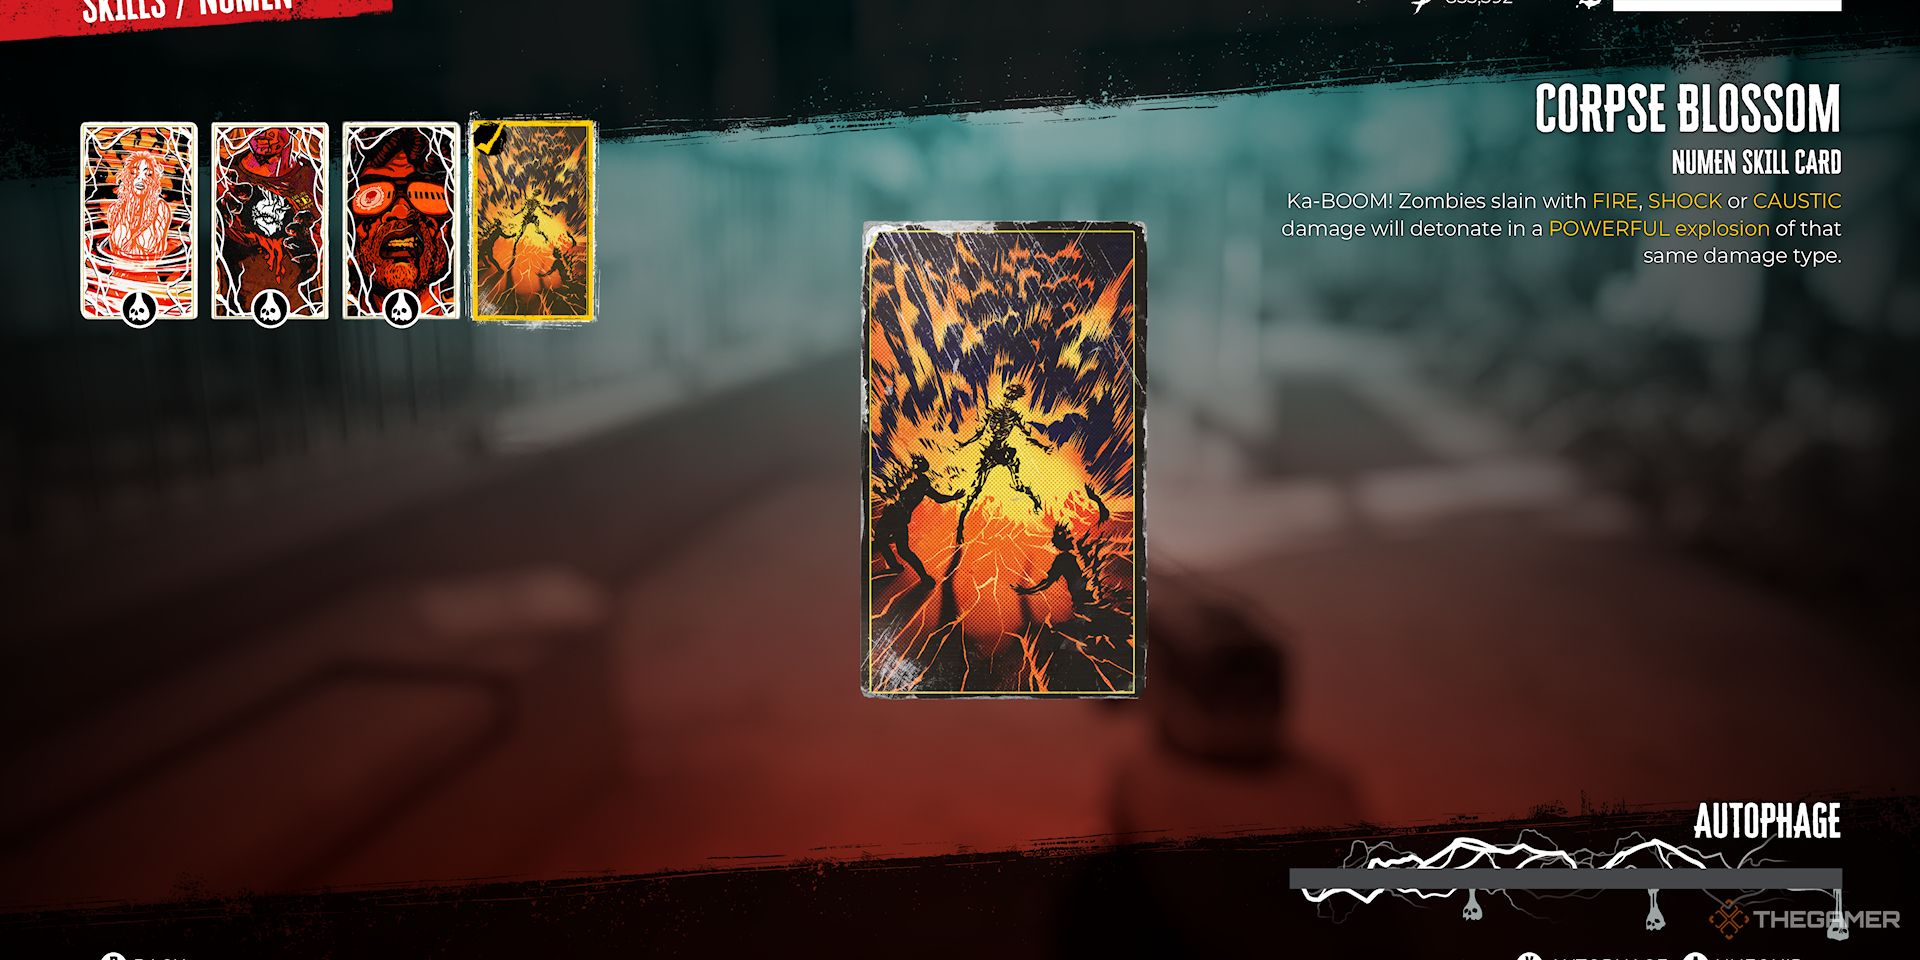 A screenshot of the Corpse Blossom Skill Card in the inventory of Dead Island 2.